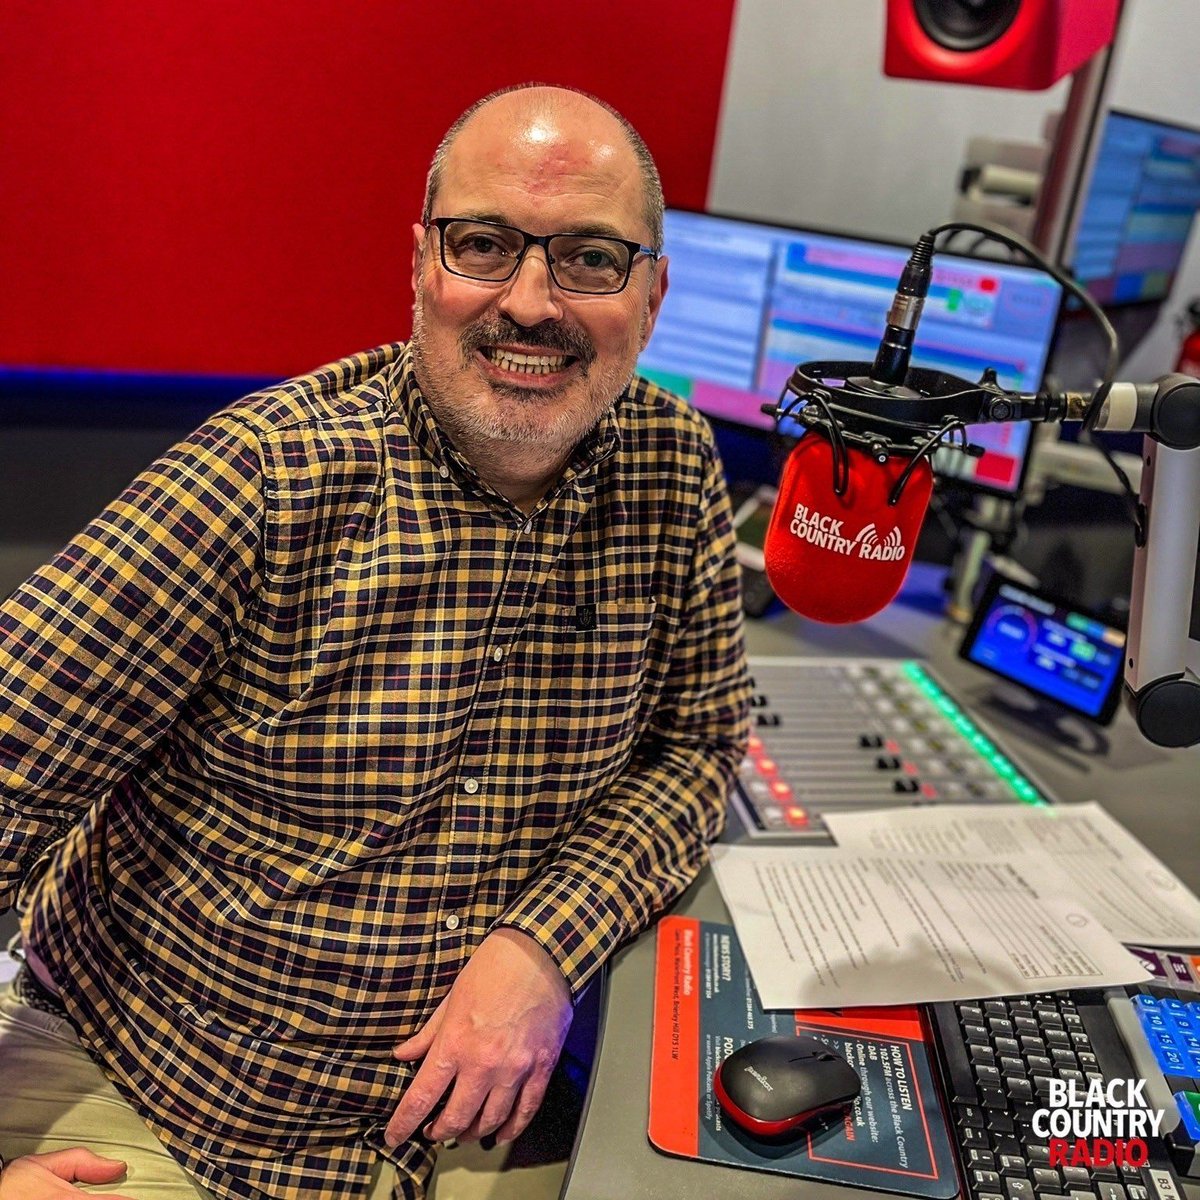 Friday Night Clive is back with @DJClivePayne from 6pm, on the way...

- GP, Dr Jim Robinson discusses obesity and what we can do to improve our health.
- Julia Hayes on the @cukwestmidlands #CreateGrowthProgramme and how it will help local businesses.

📲 onelink.to/wearebcr